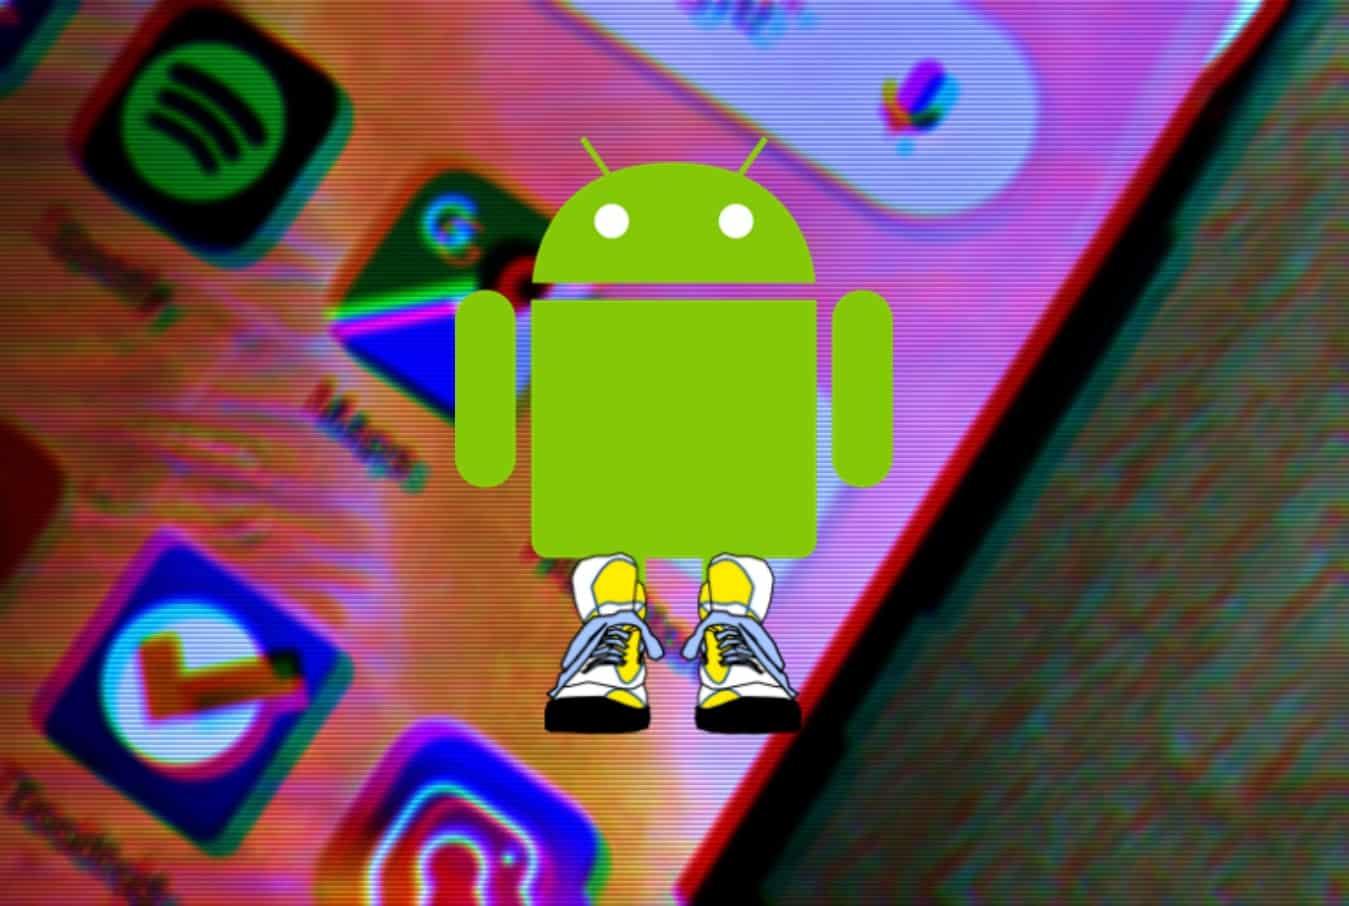 Shoe give away scam hits Android users with malware on Play Store